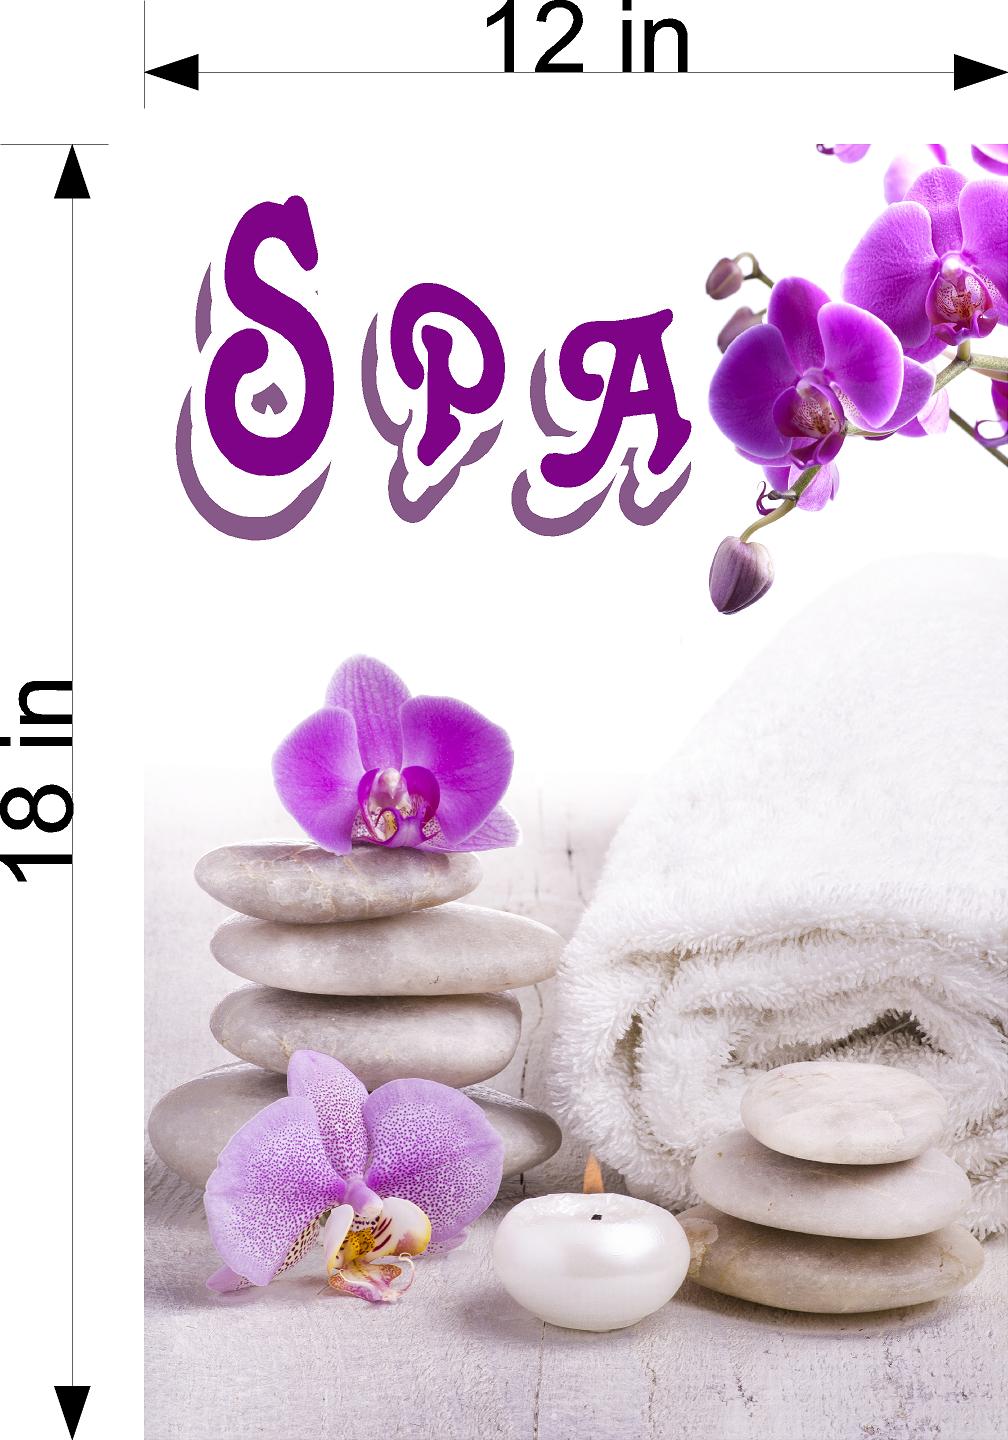 Spa 02 Wallpaper Poster Decal with Adhesive Backing Wall Sticker Decor Indoors Interior Sign Vertical